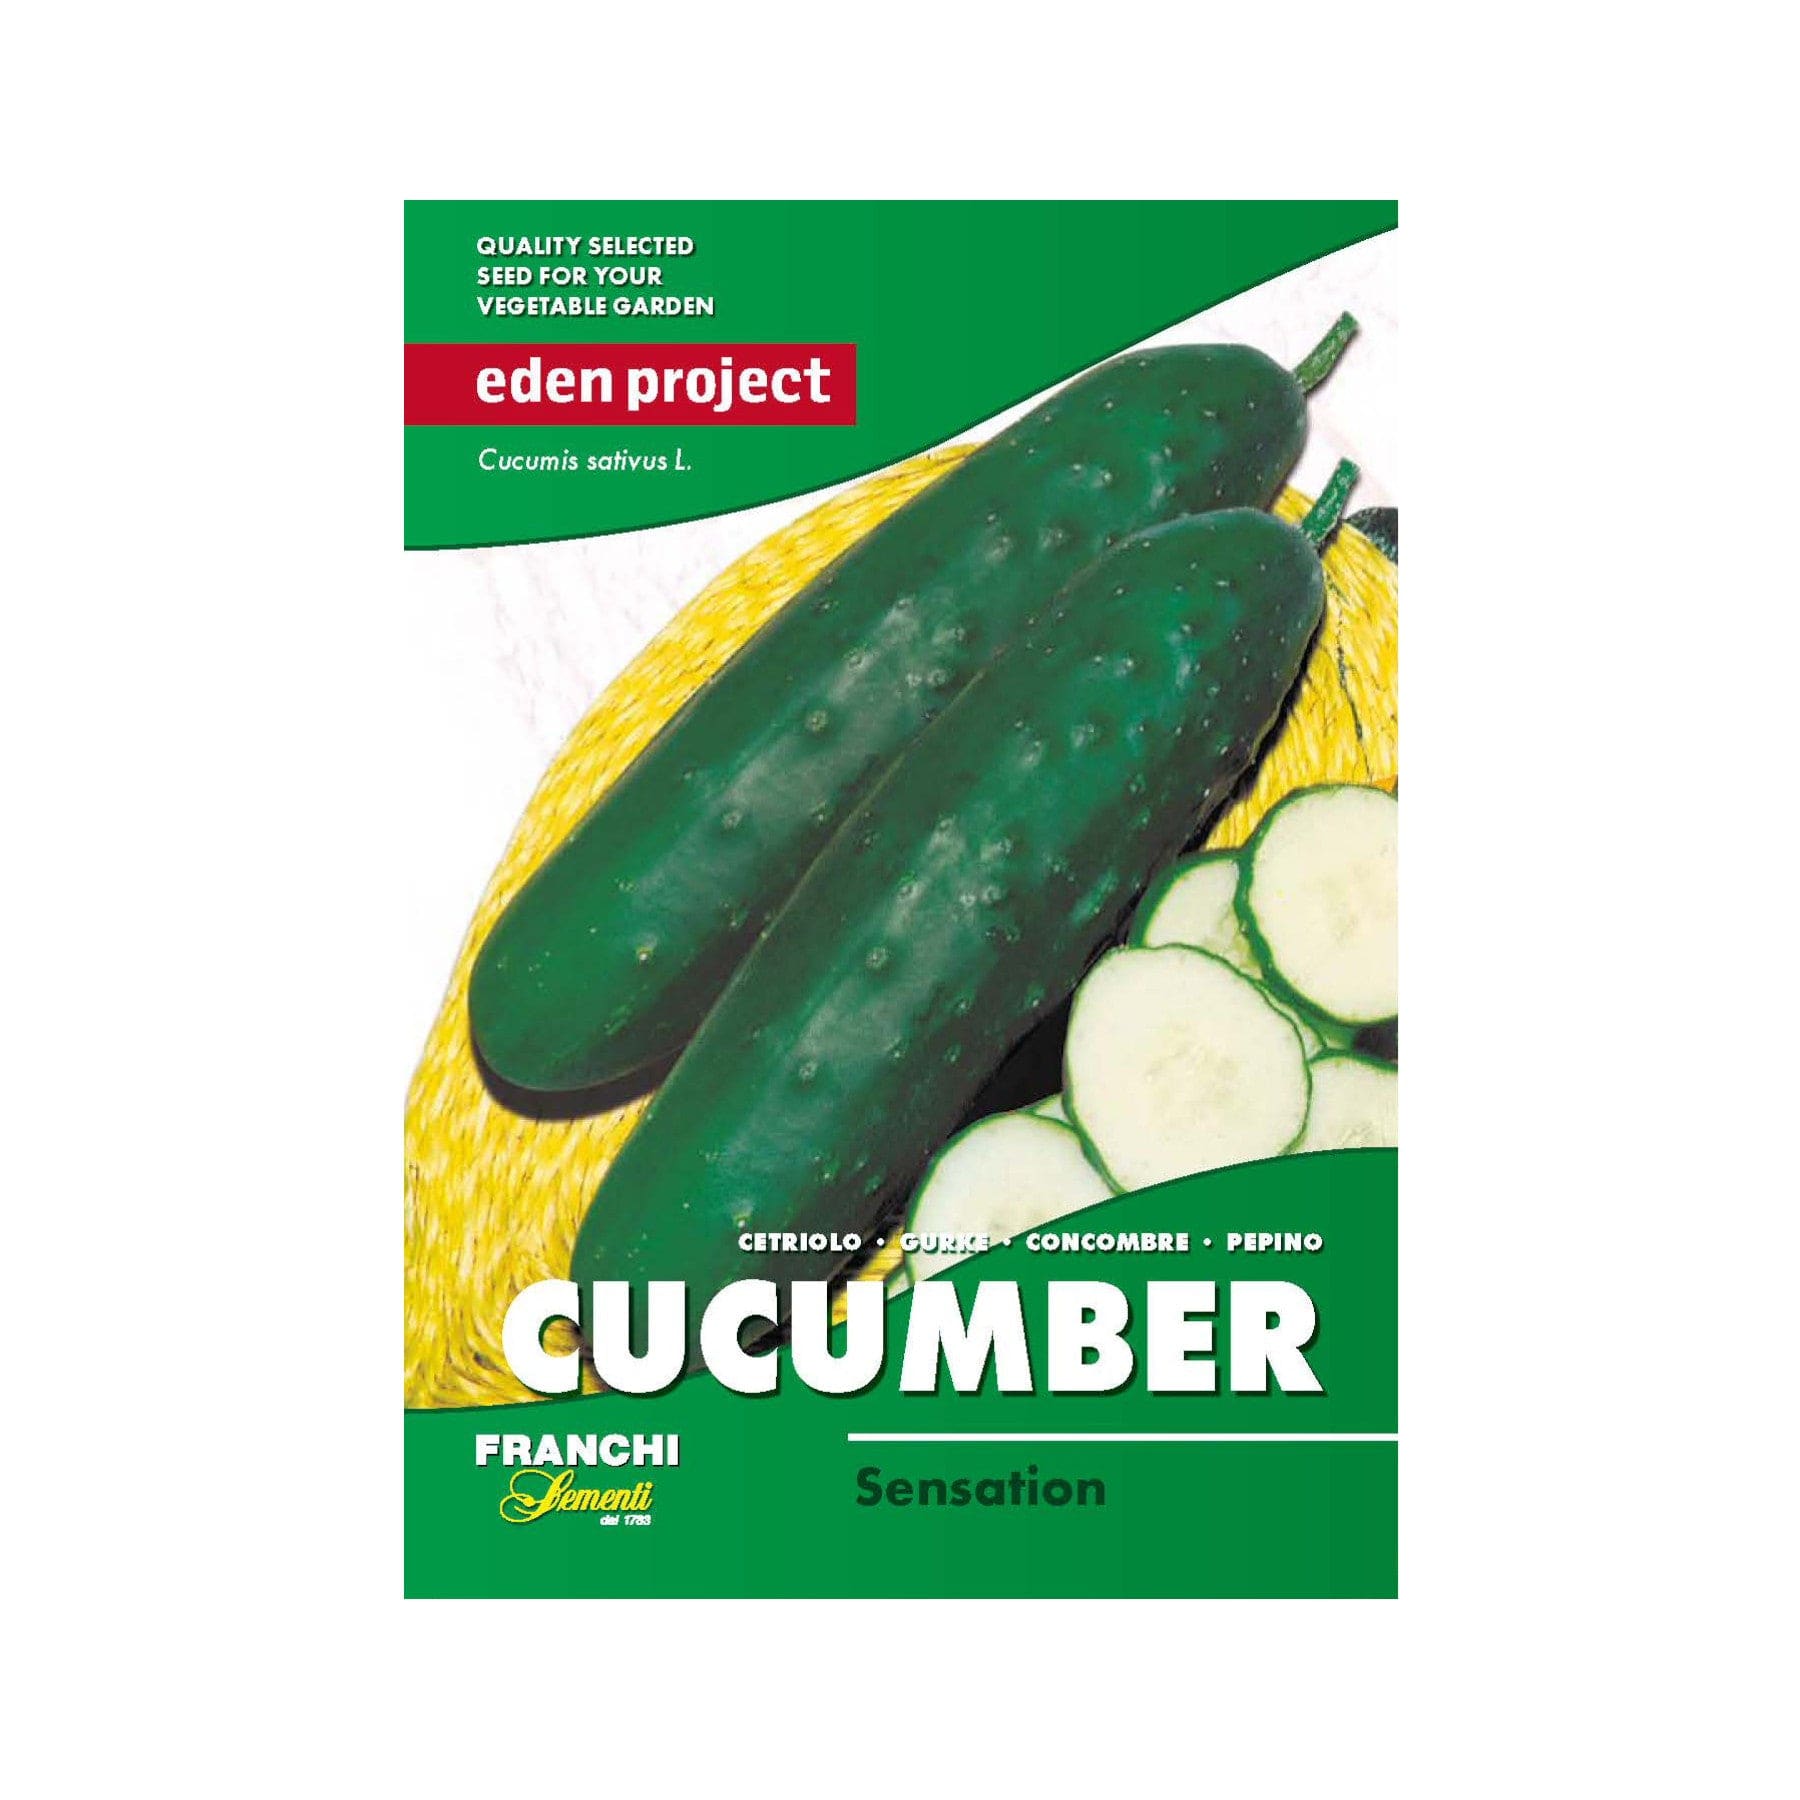 Alt text: Packet of Franchi cucumber seeds from the Eden Project, featuring images of fresh green cucumbers and sliced cucumber pieces, labeled Cucumis sativus with multilingual vegetable names.